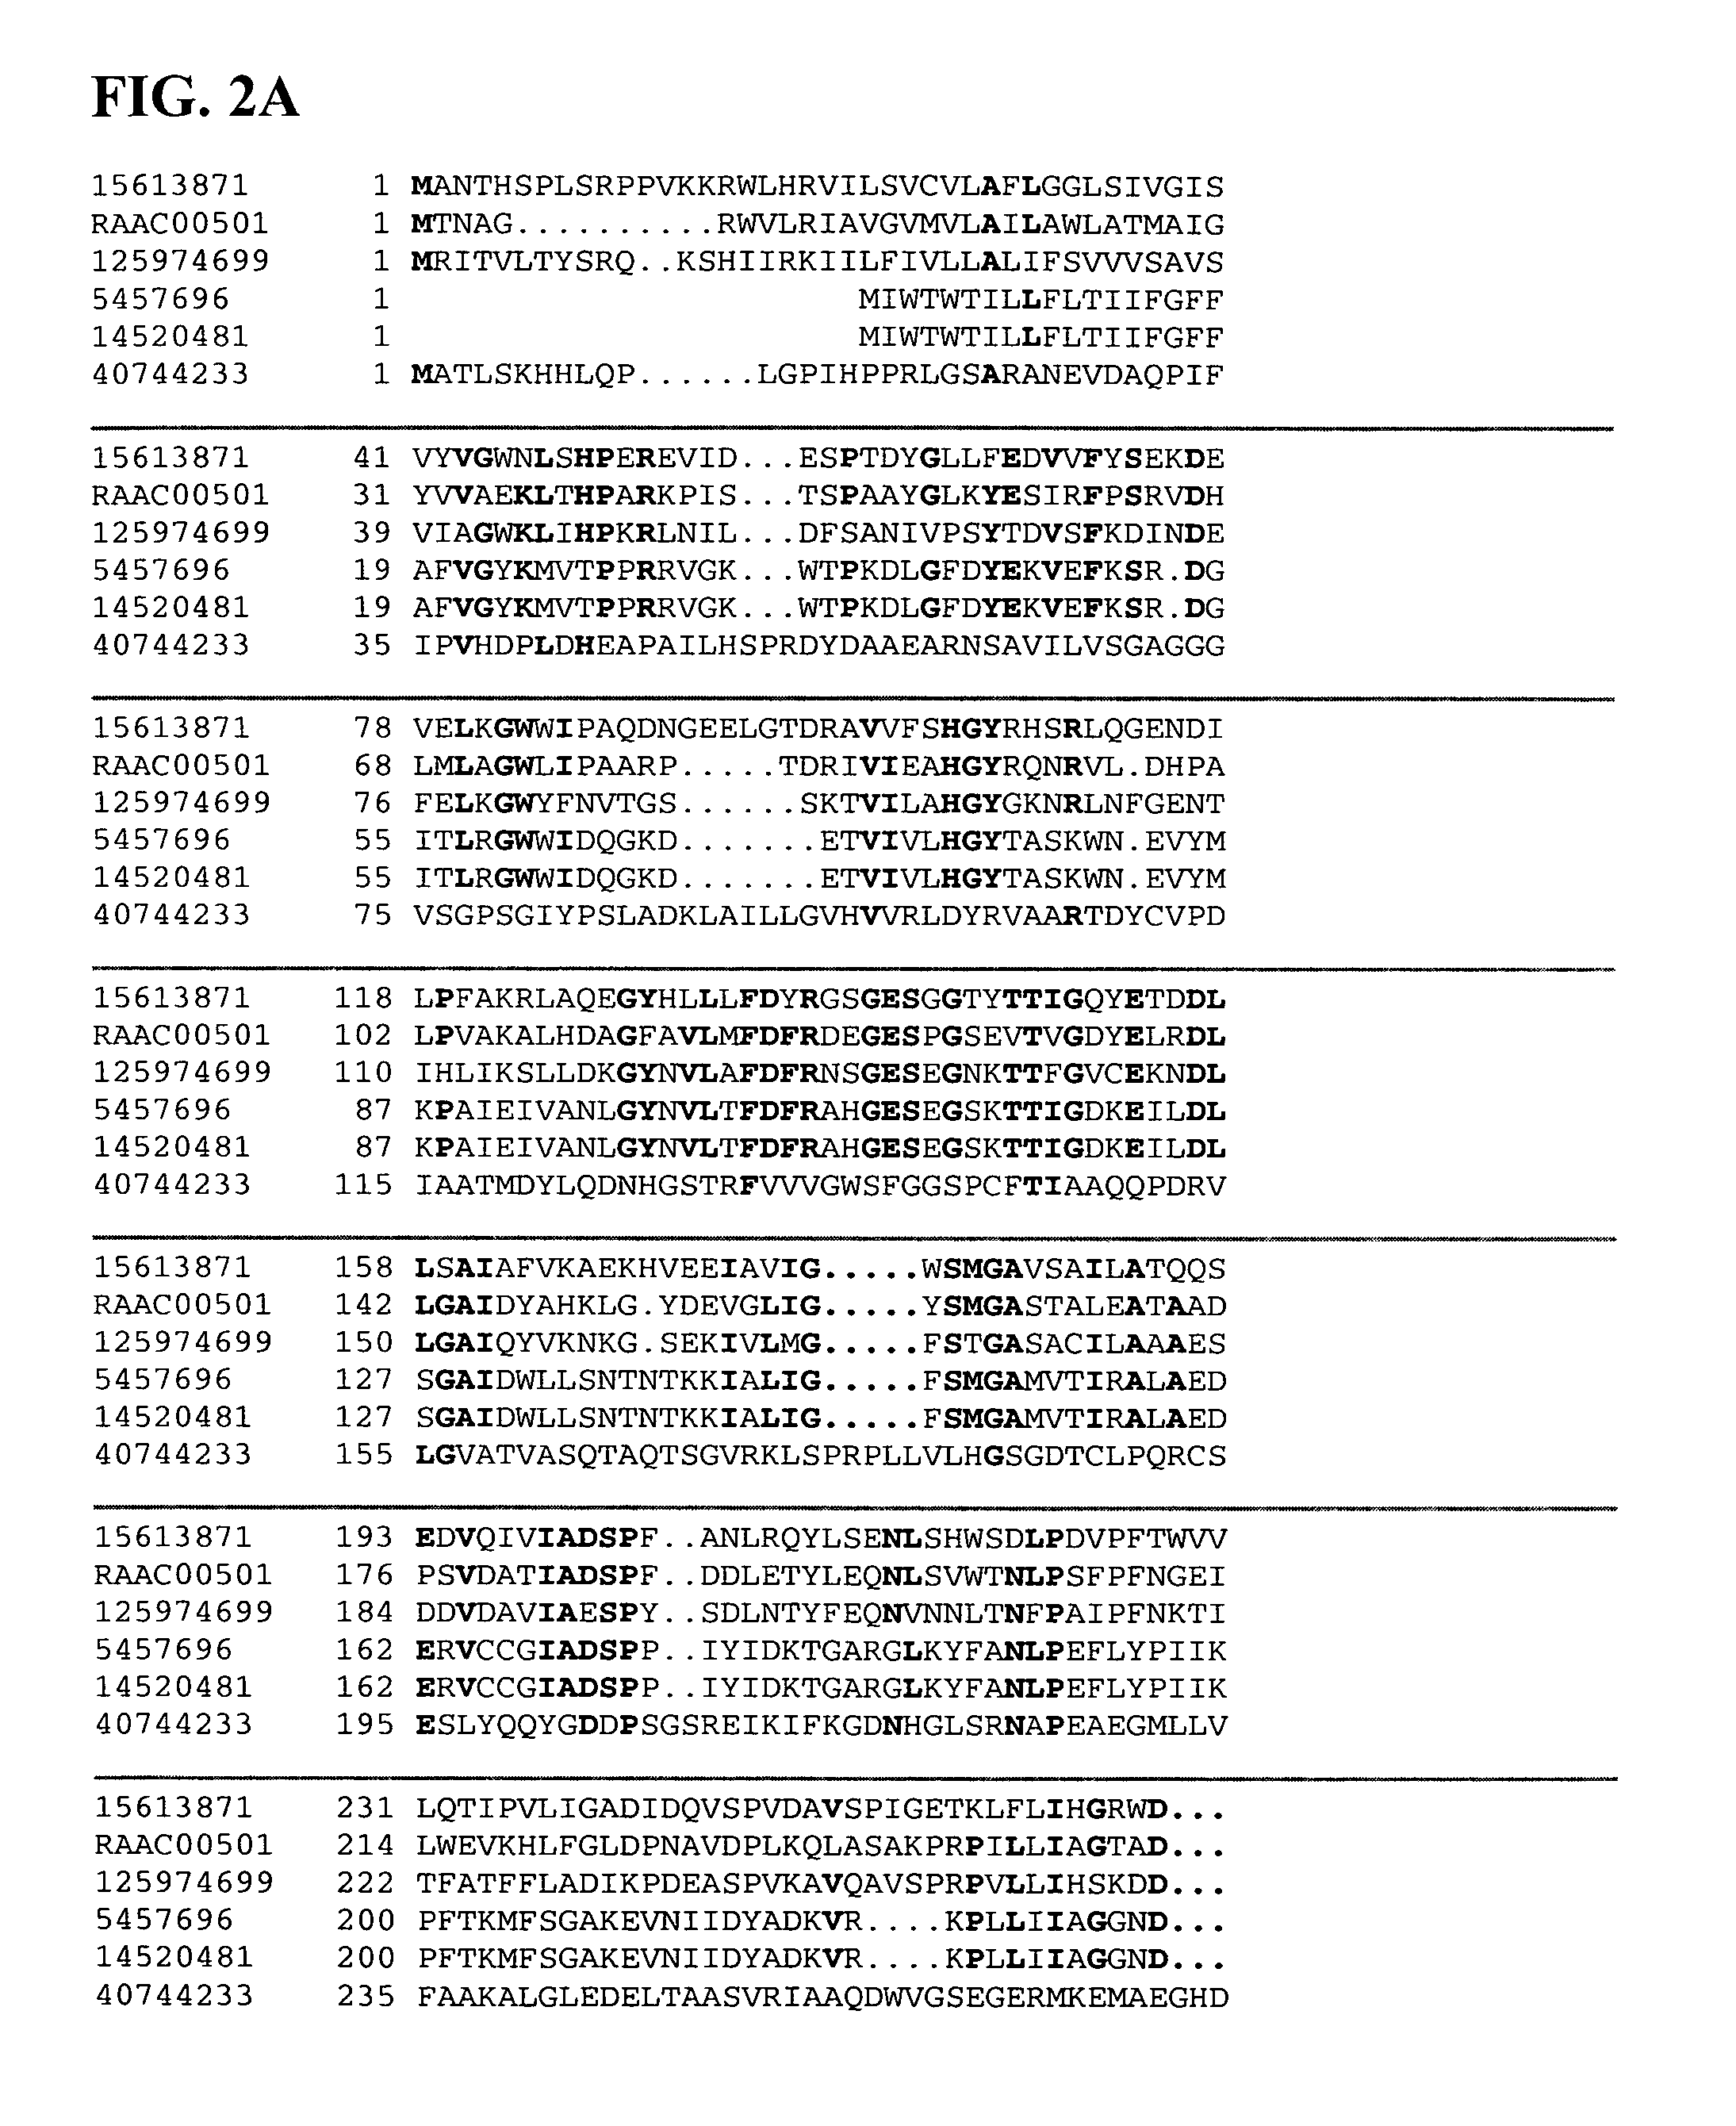 Thermophilic and thermoacidophilic biopolymer-degrading genes and enzymes from Alicyclobacillus acidocaldarius and related organisms, methods